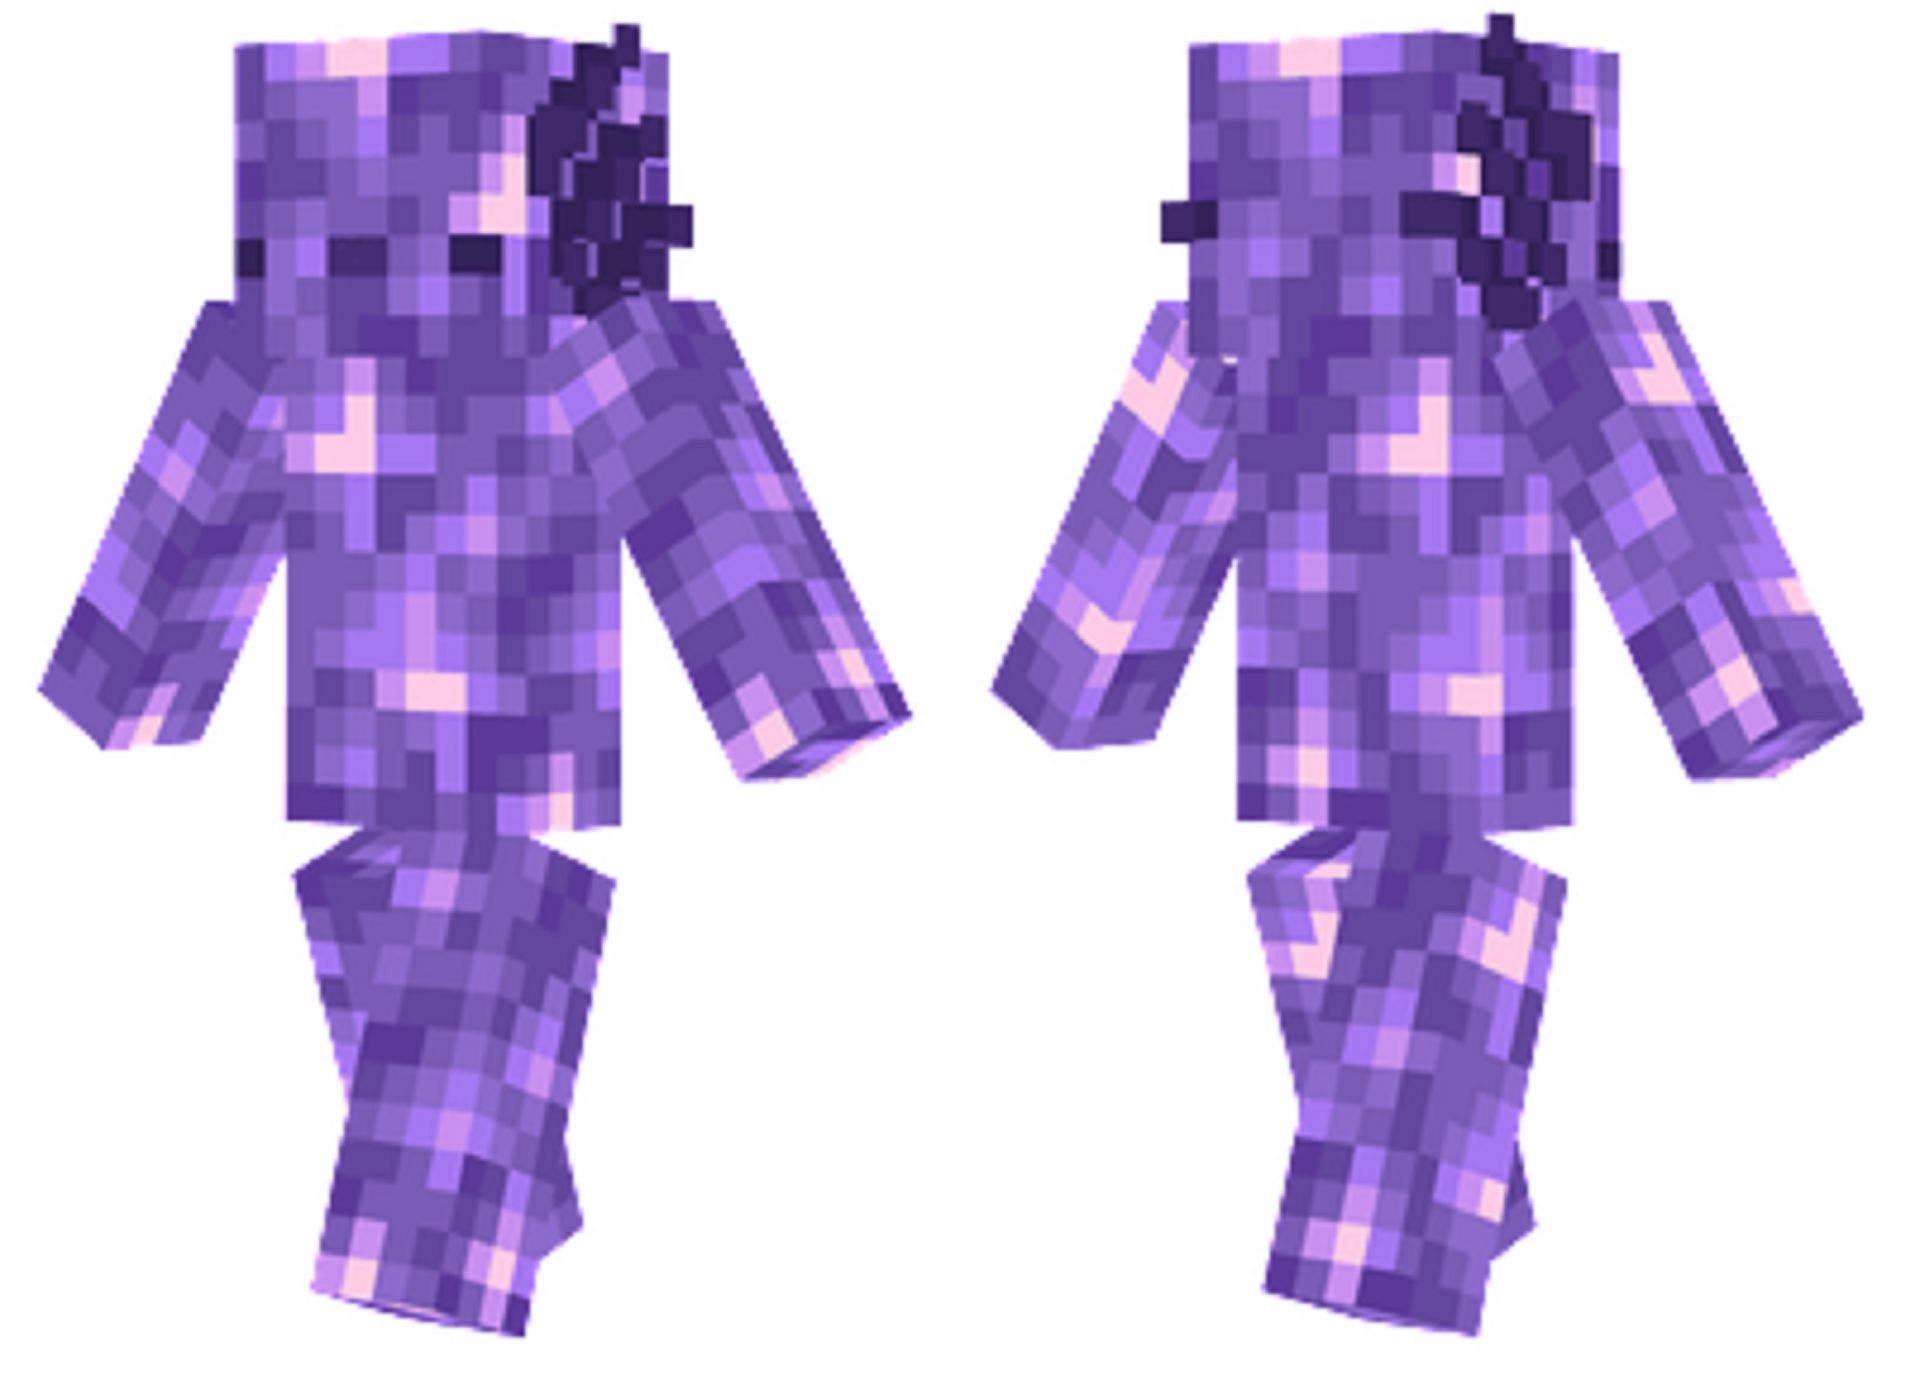 This skin is sure to grab attention (Image via Cleora/MinecraftSkins.net)